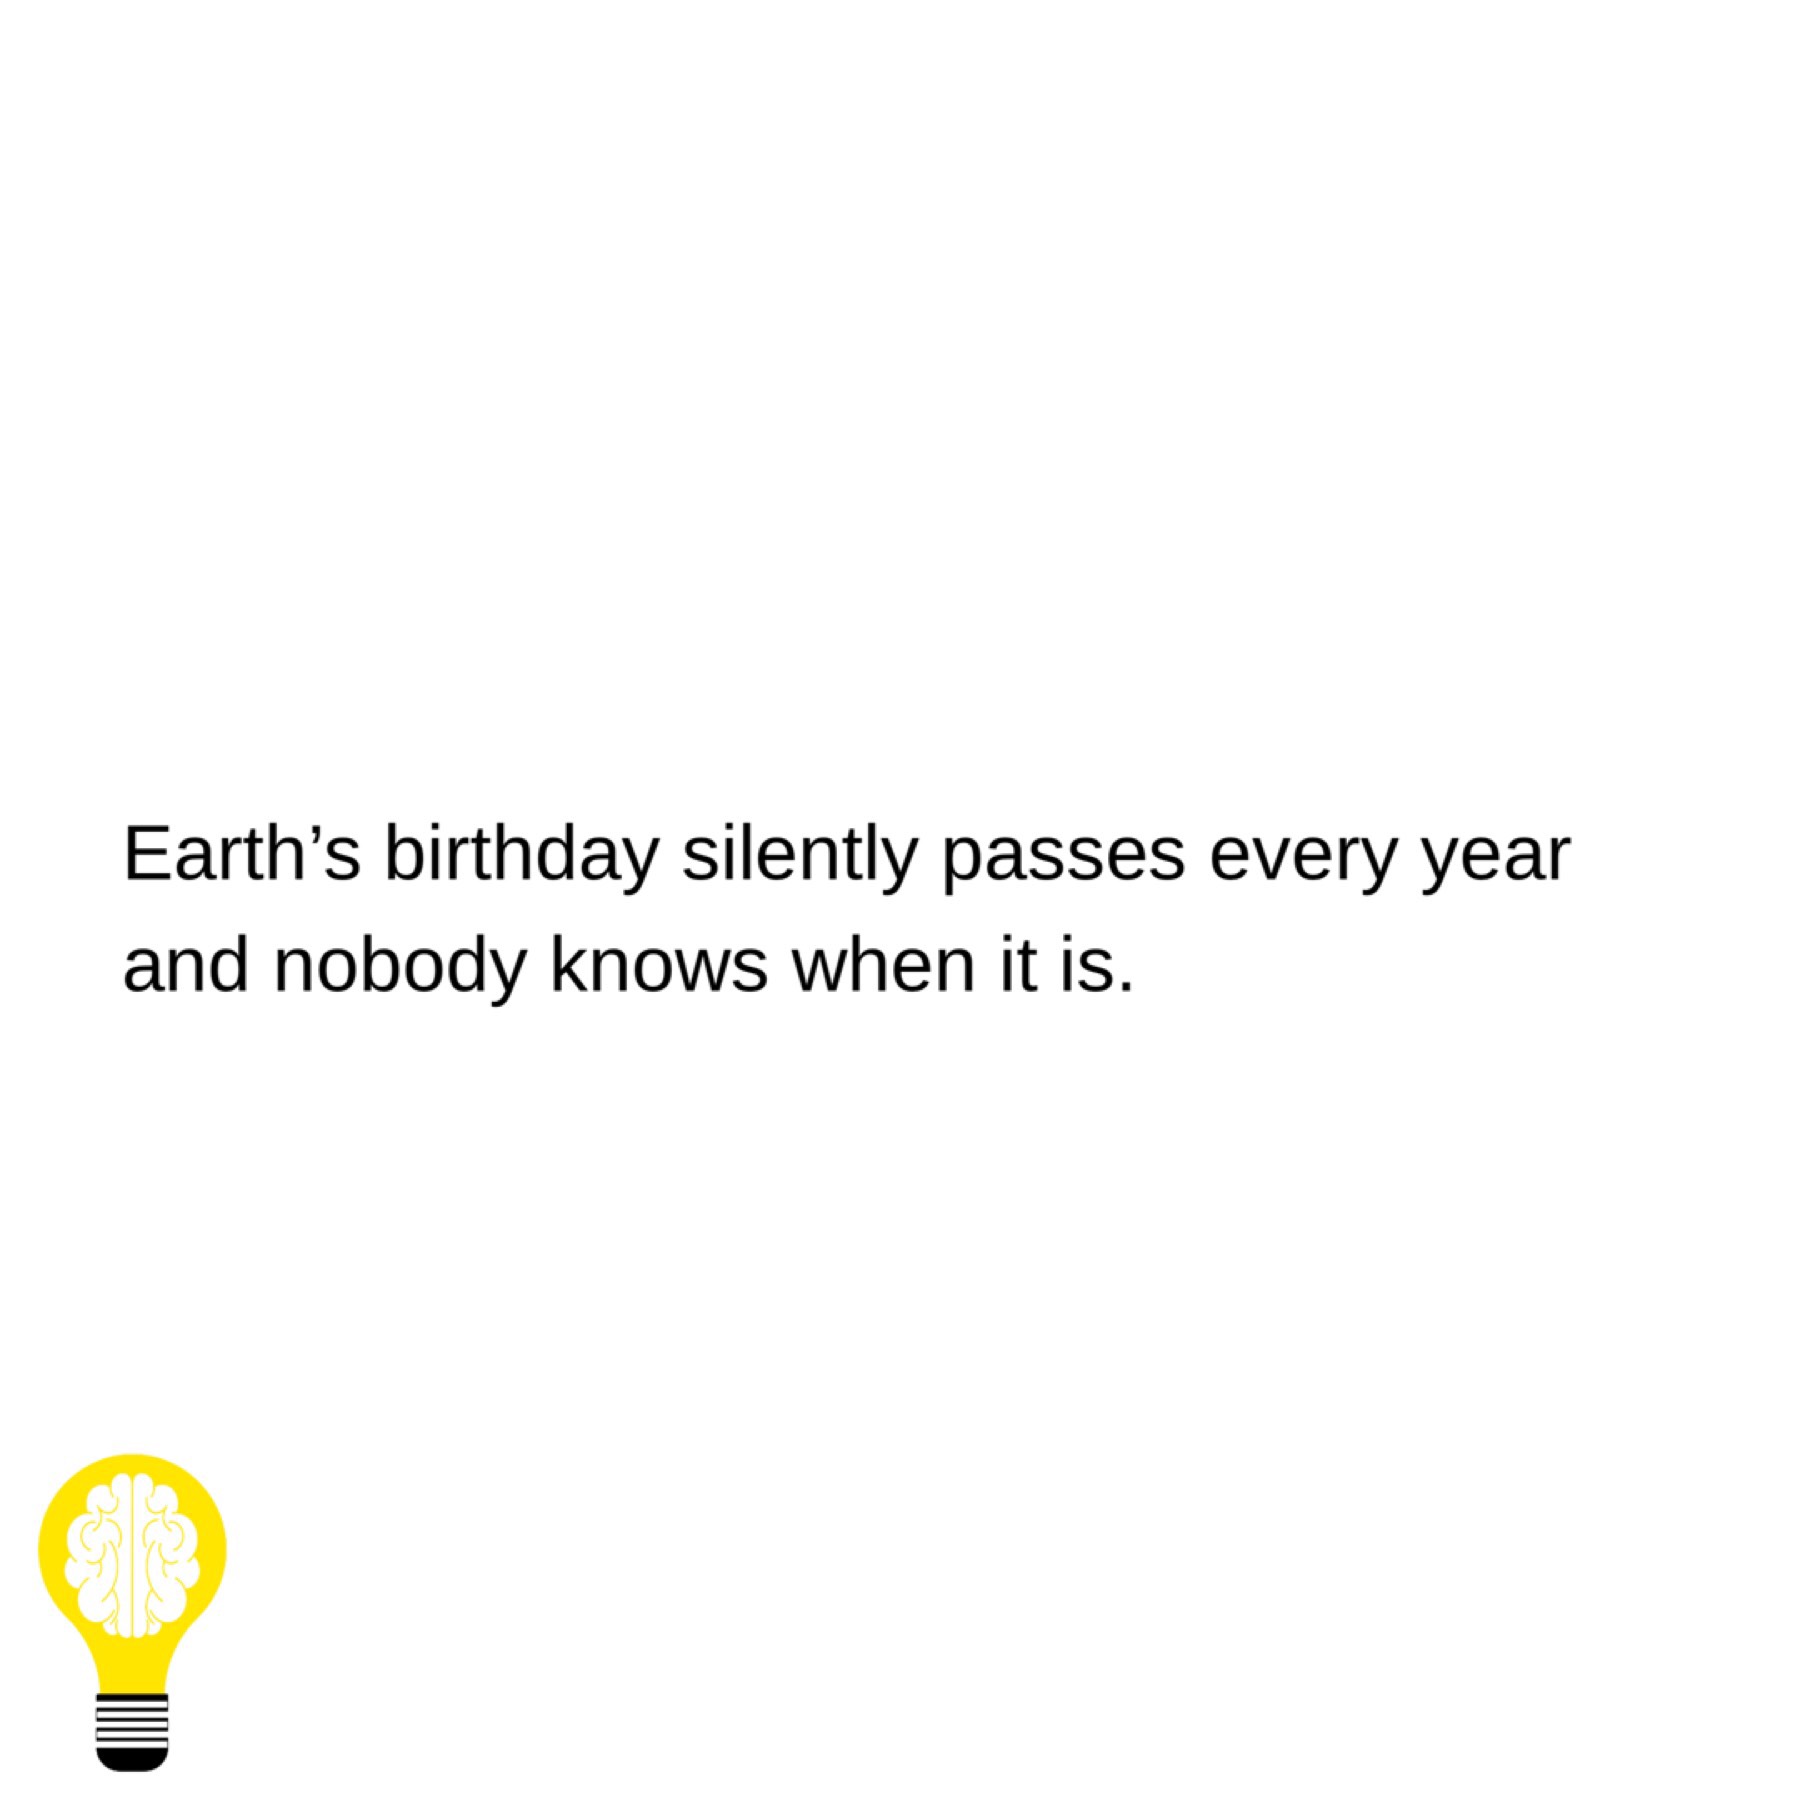 tap for question 🌎

If you could choose any date for Earth’s birthday to be on, what day would you choose and why?